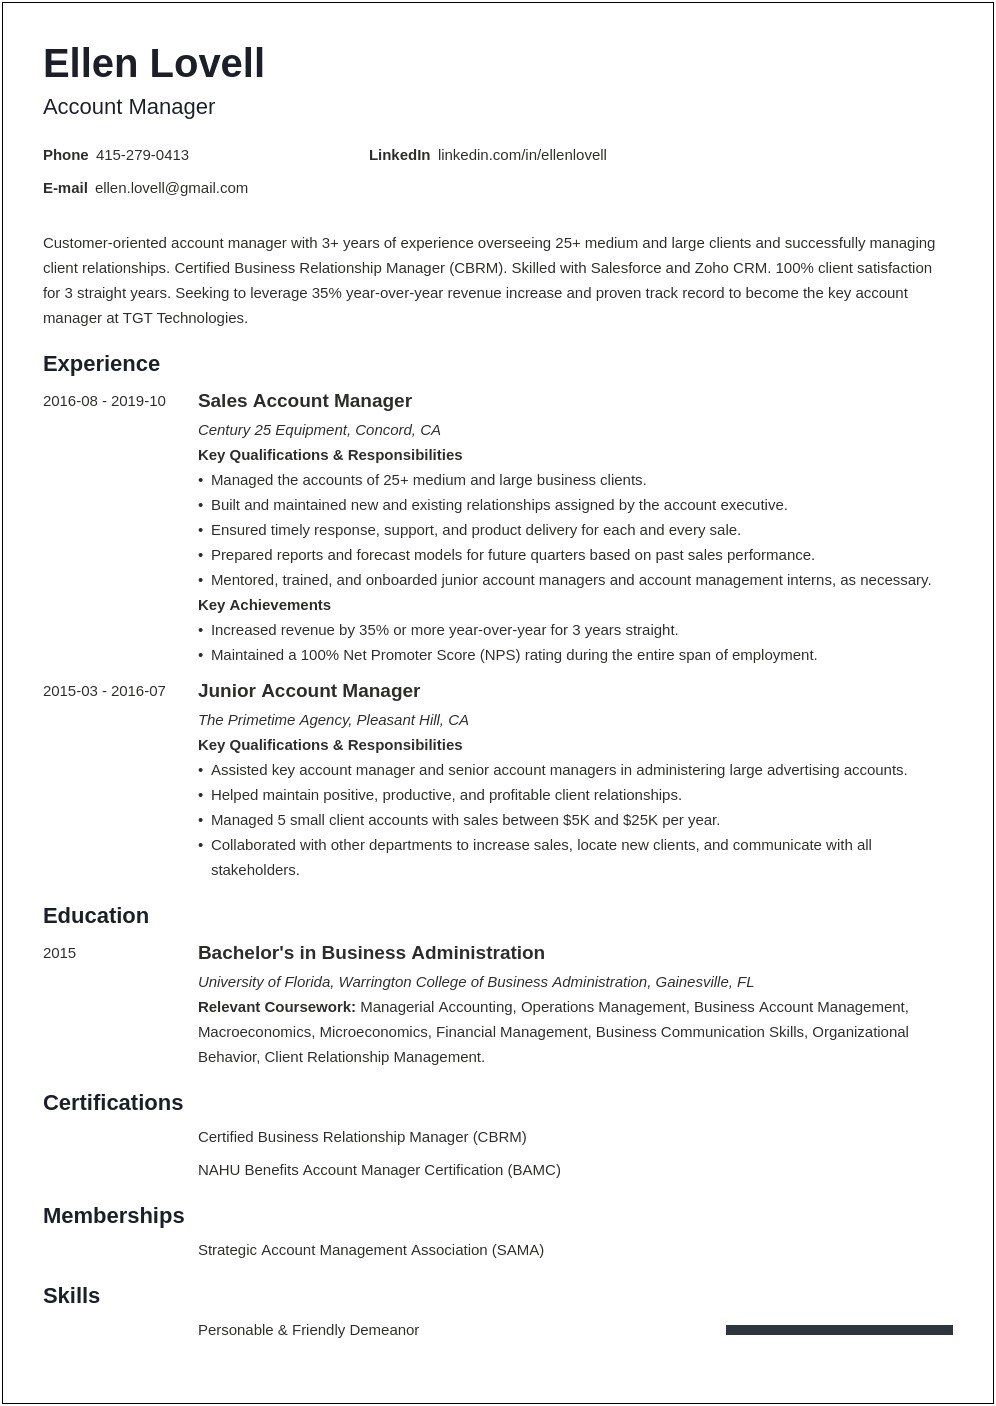 Sample Achievement Driven Resume For Account Manager